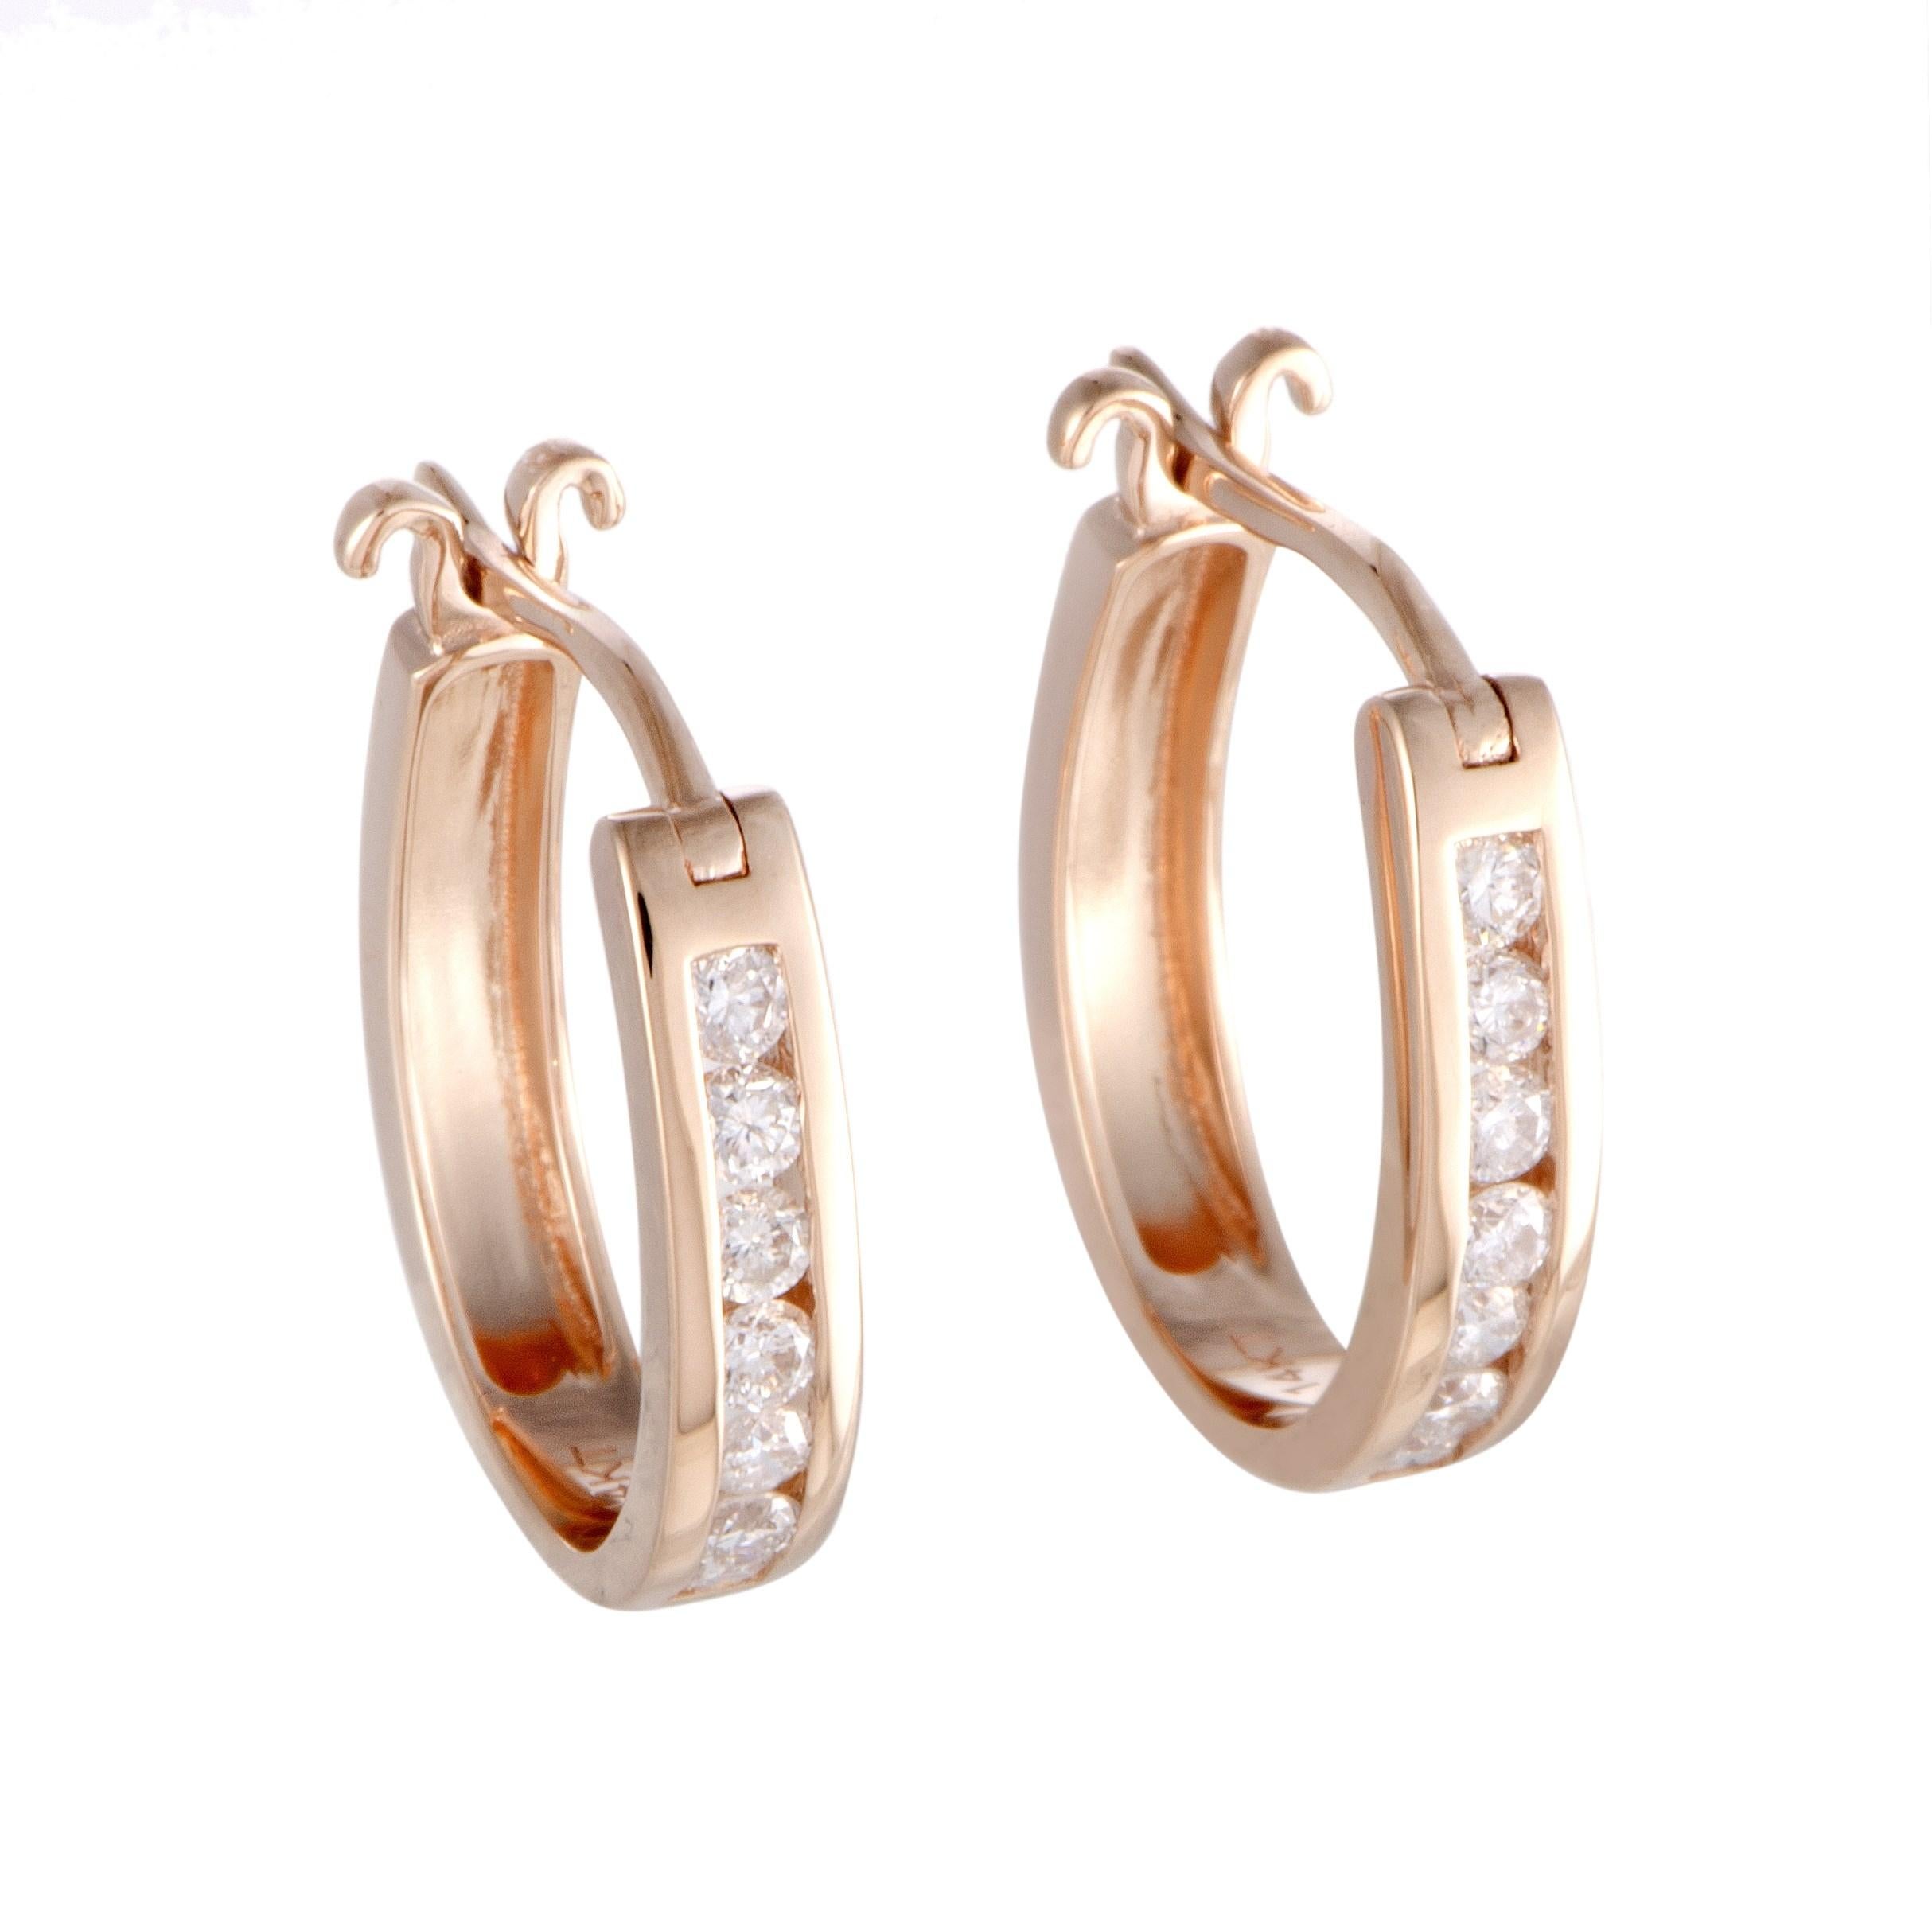 LB Exclusive 14k Rose Gold 0.33 Ct Diamond Small Oval Hoop Earrings In Excellent Condition For Sale In Southampton, PA